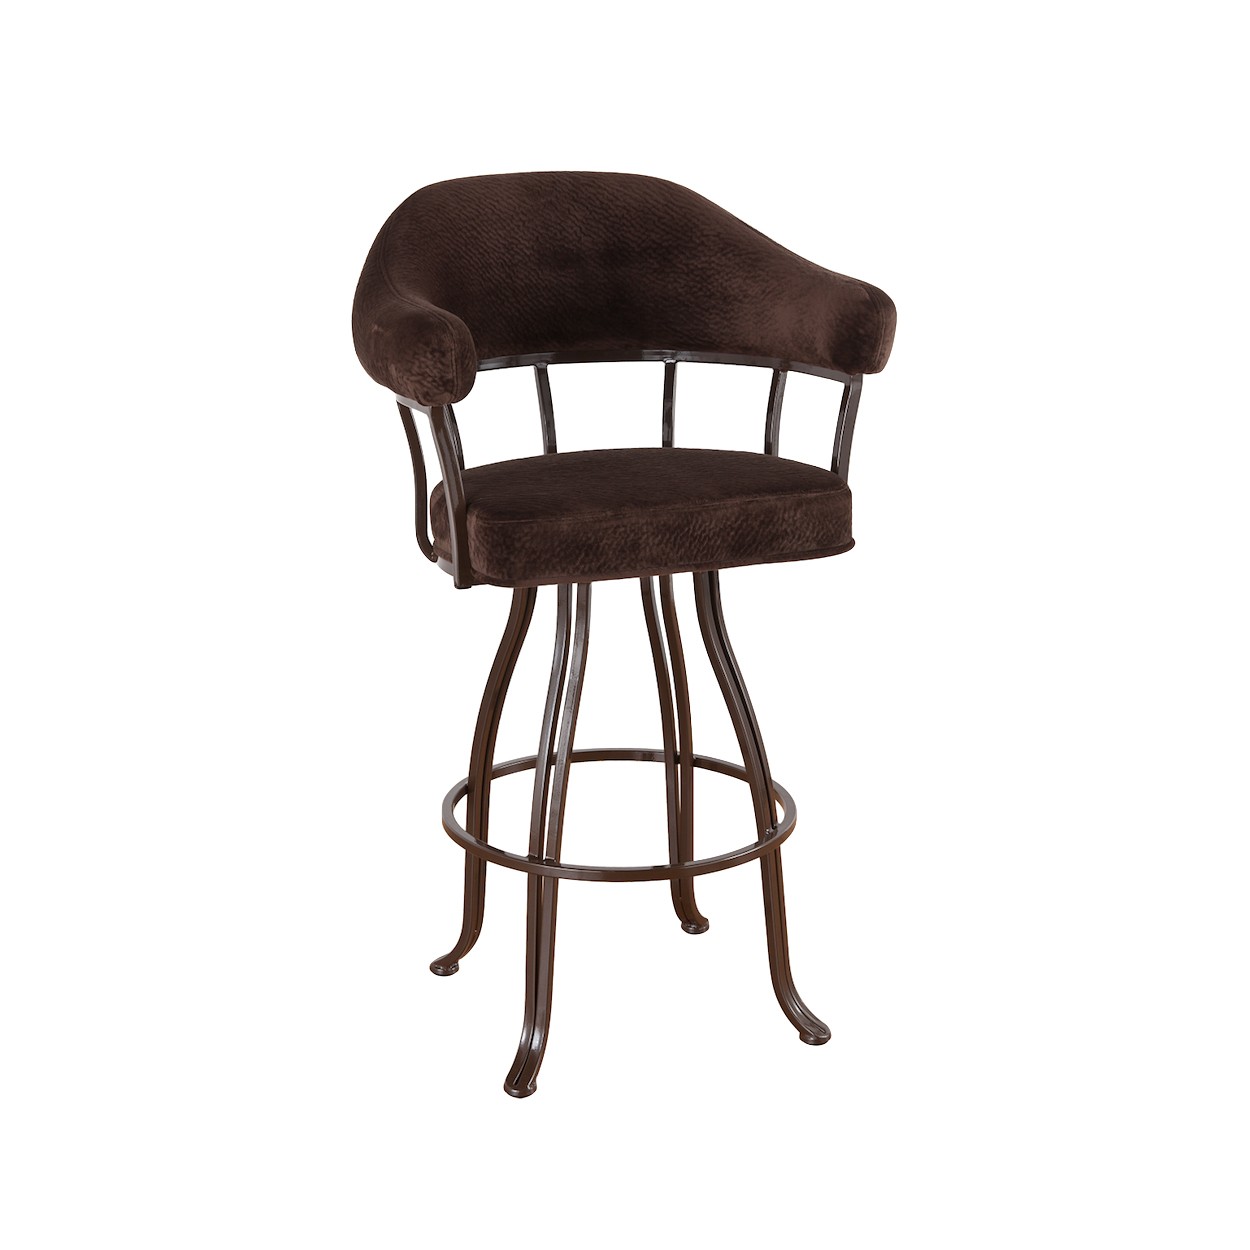 Callee London Swivel Stool With Arms, Bar Stools That Swivel And Have Arms